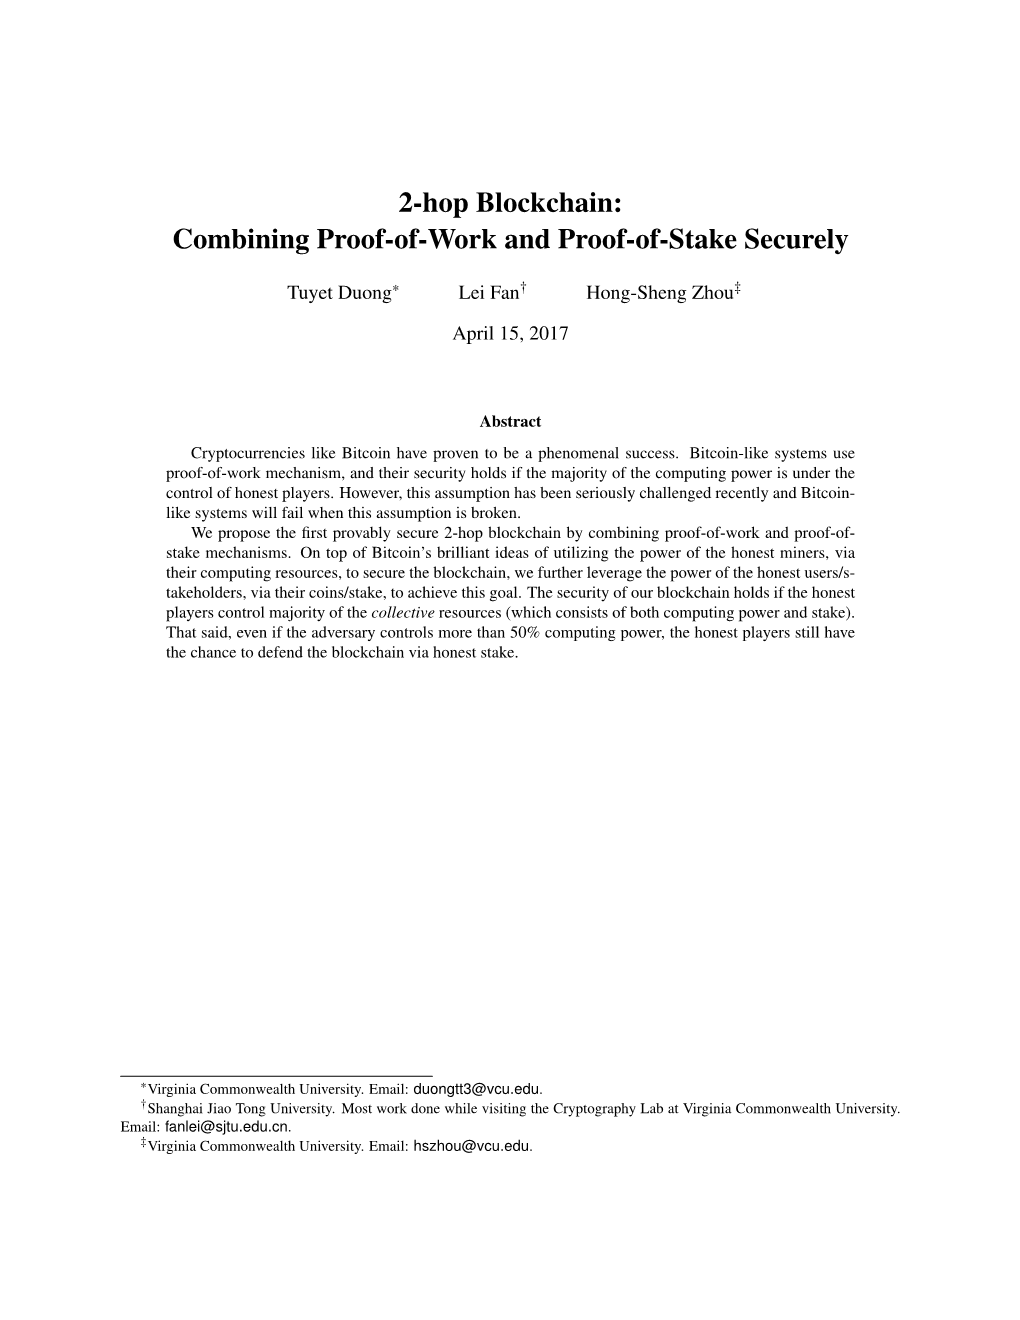 2-Hop Blockchain: Combining Proof-Of-Work and Proof-Of-Stake Securely